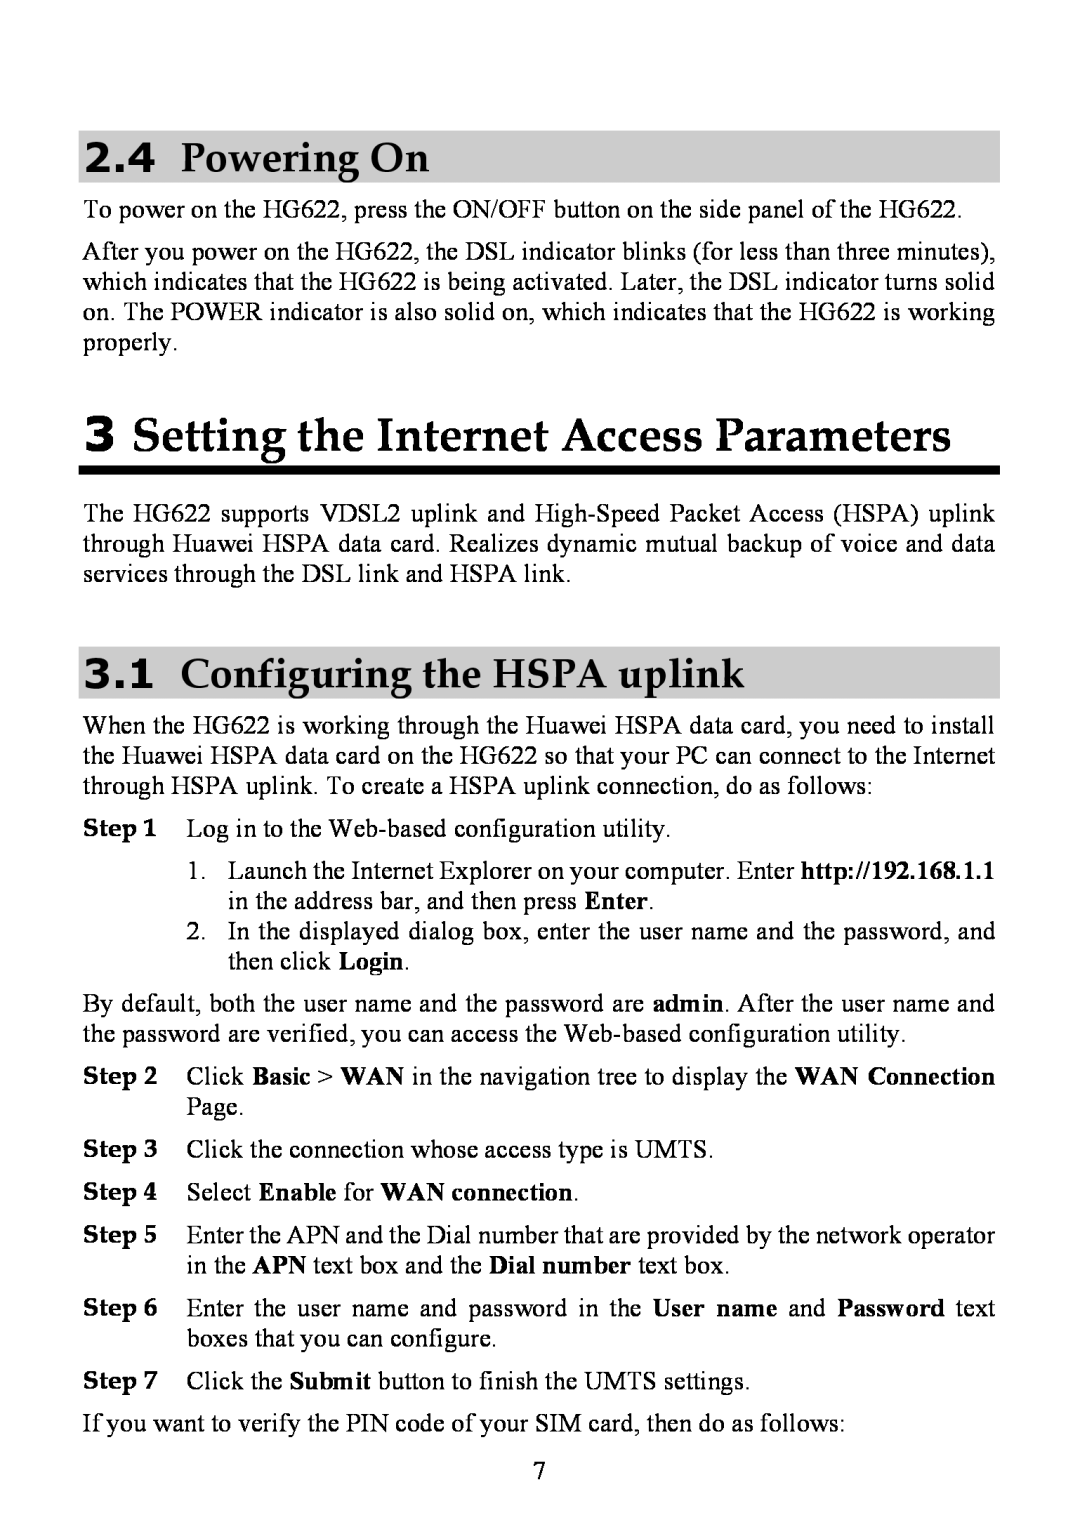 Huawei HG622 manual 3Setting the Internet Access Parameters, 2.4Powering On, 3.1Configuring the HSPA uplink 